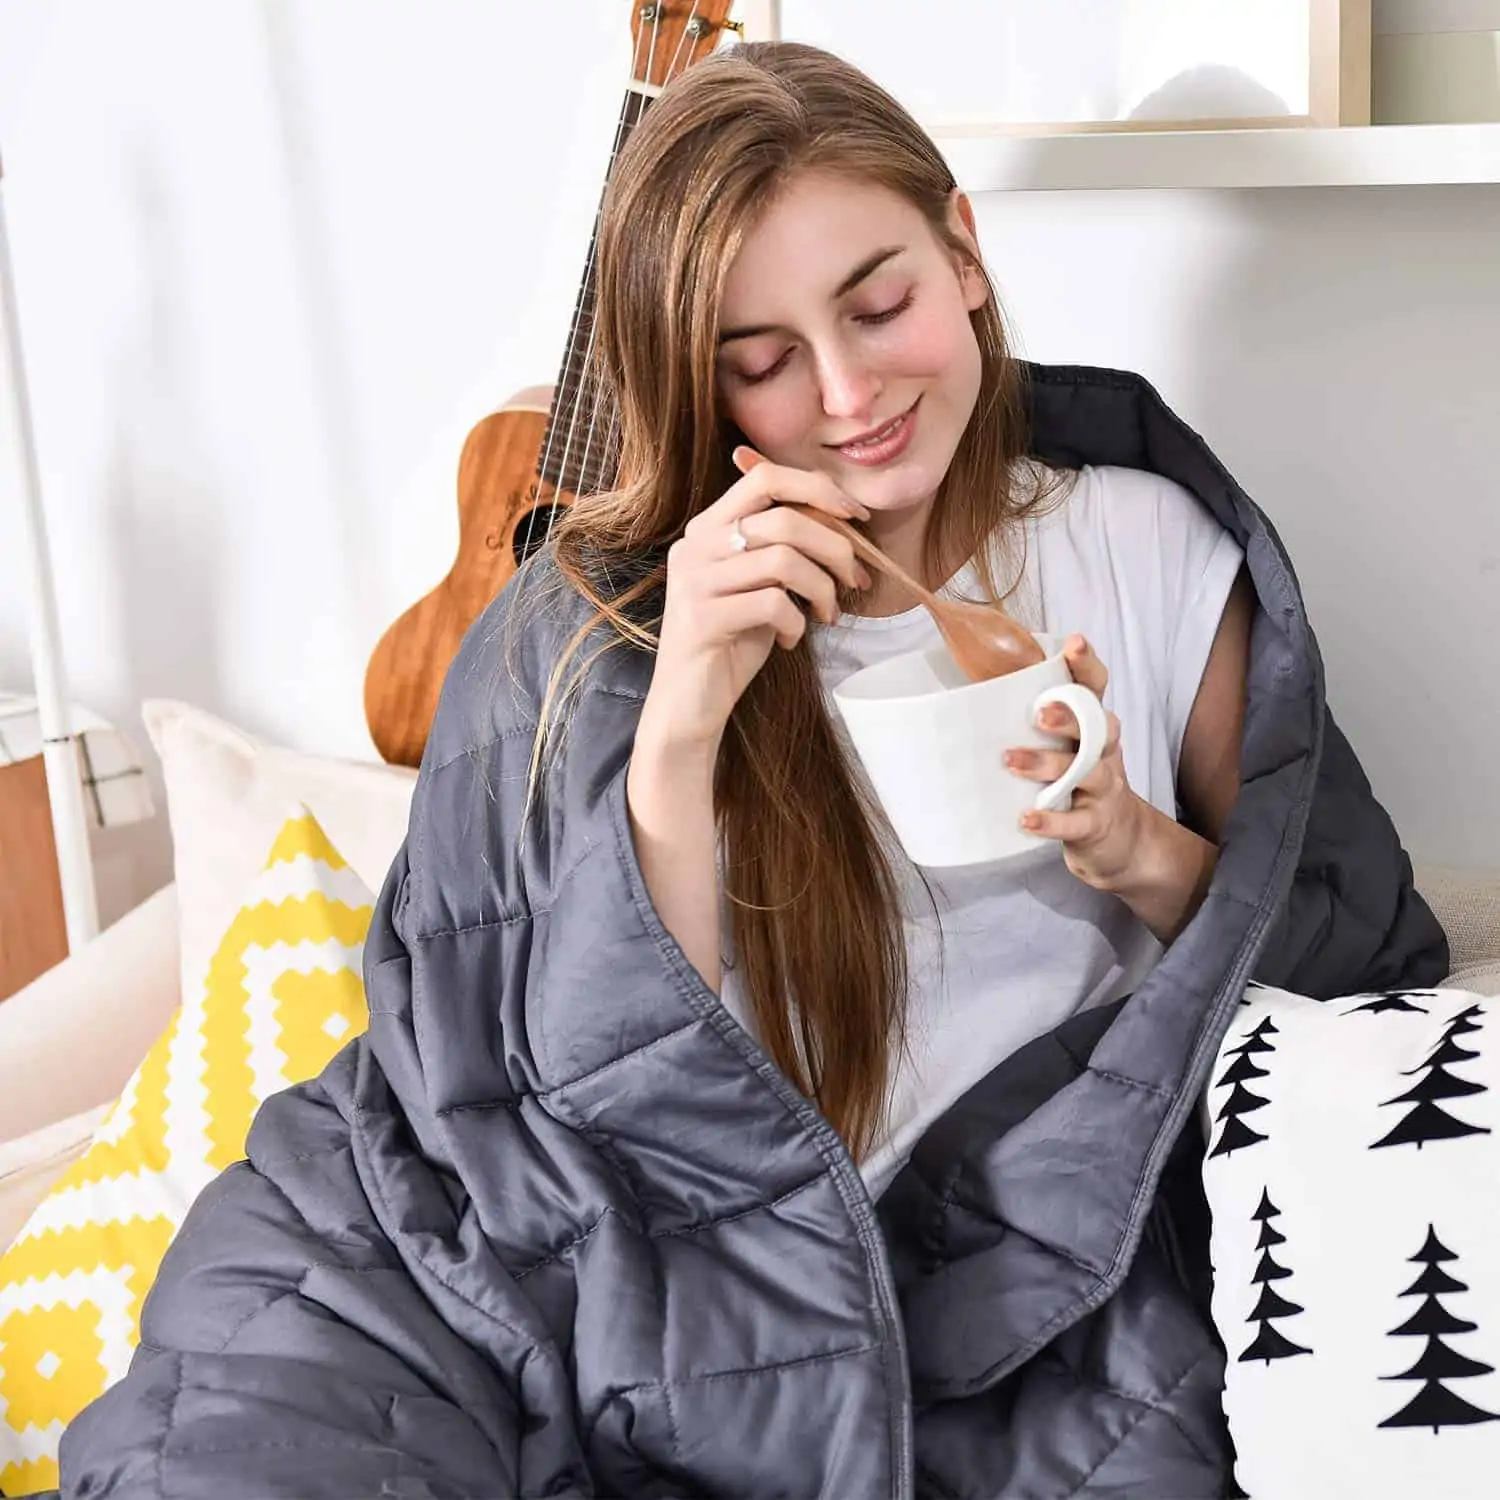 woman eating out of a bowl wrapped in a blanket